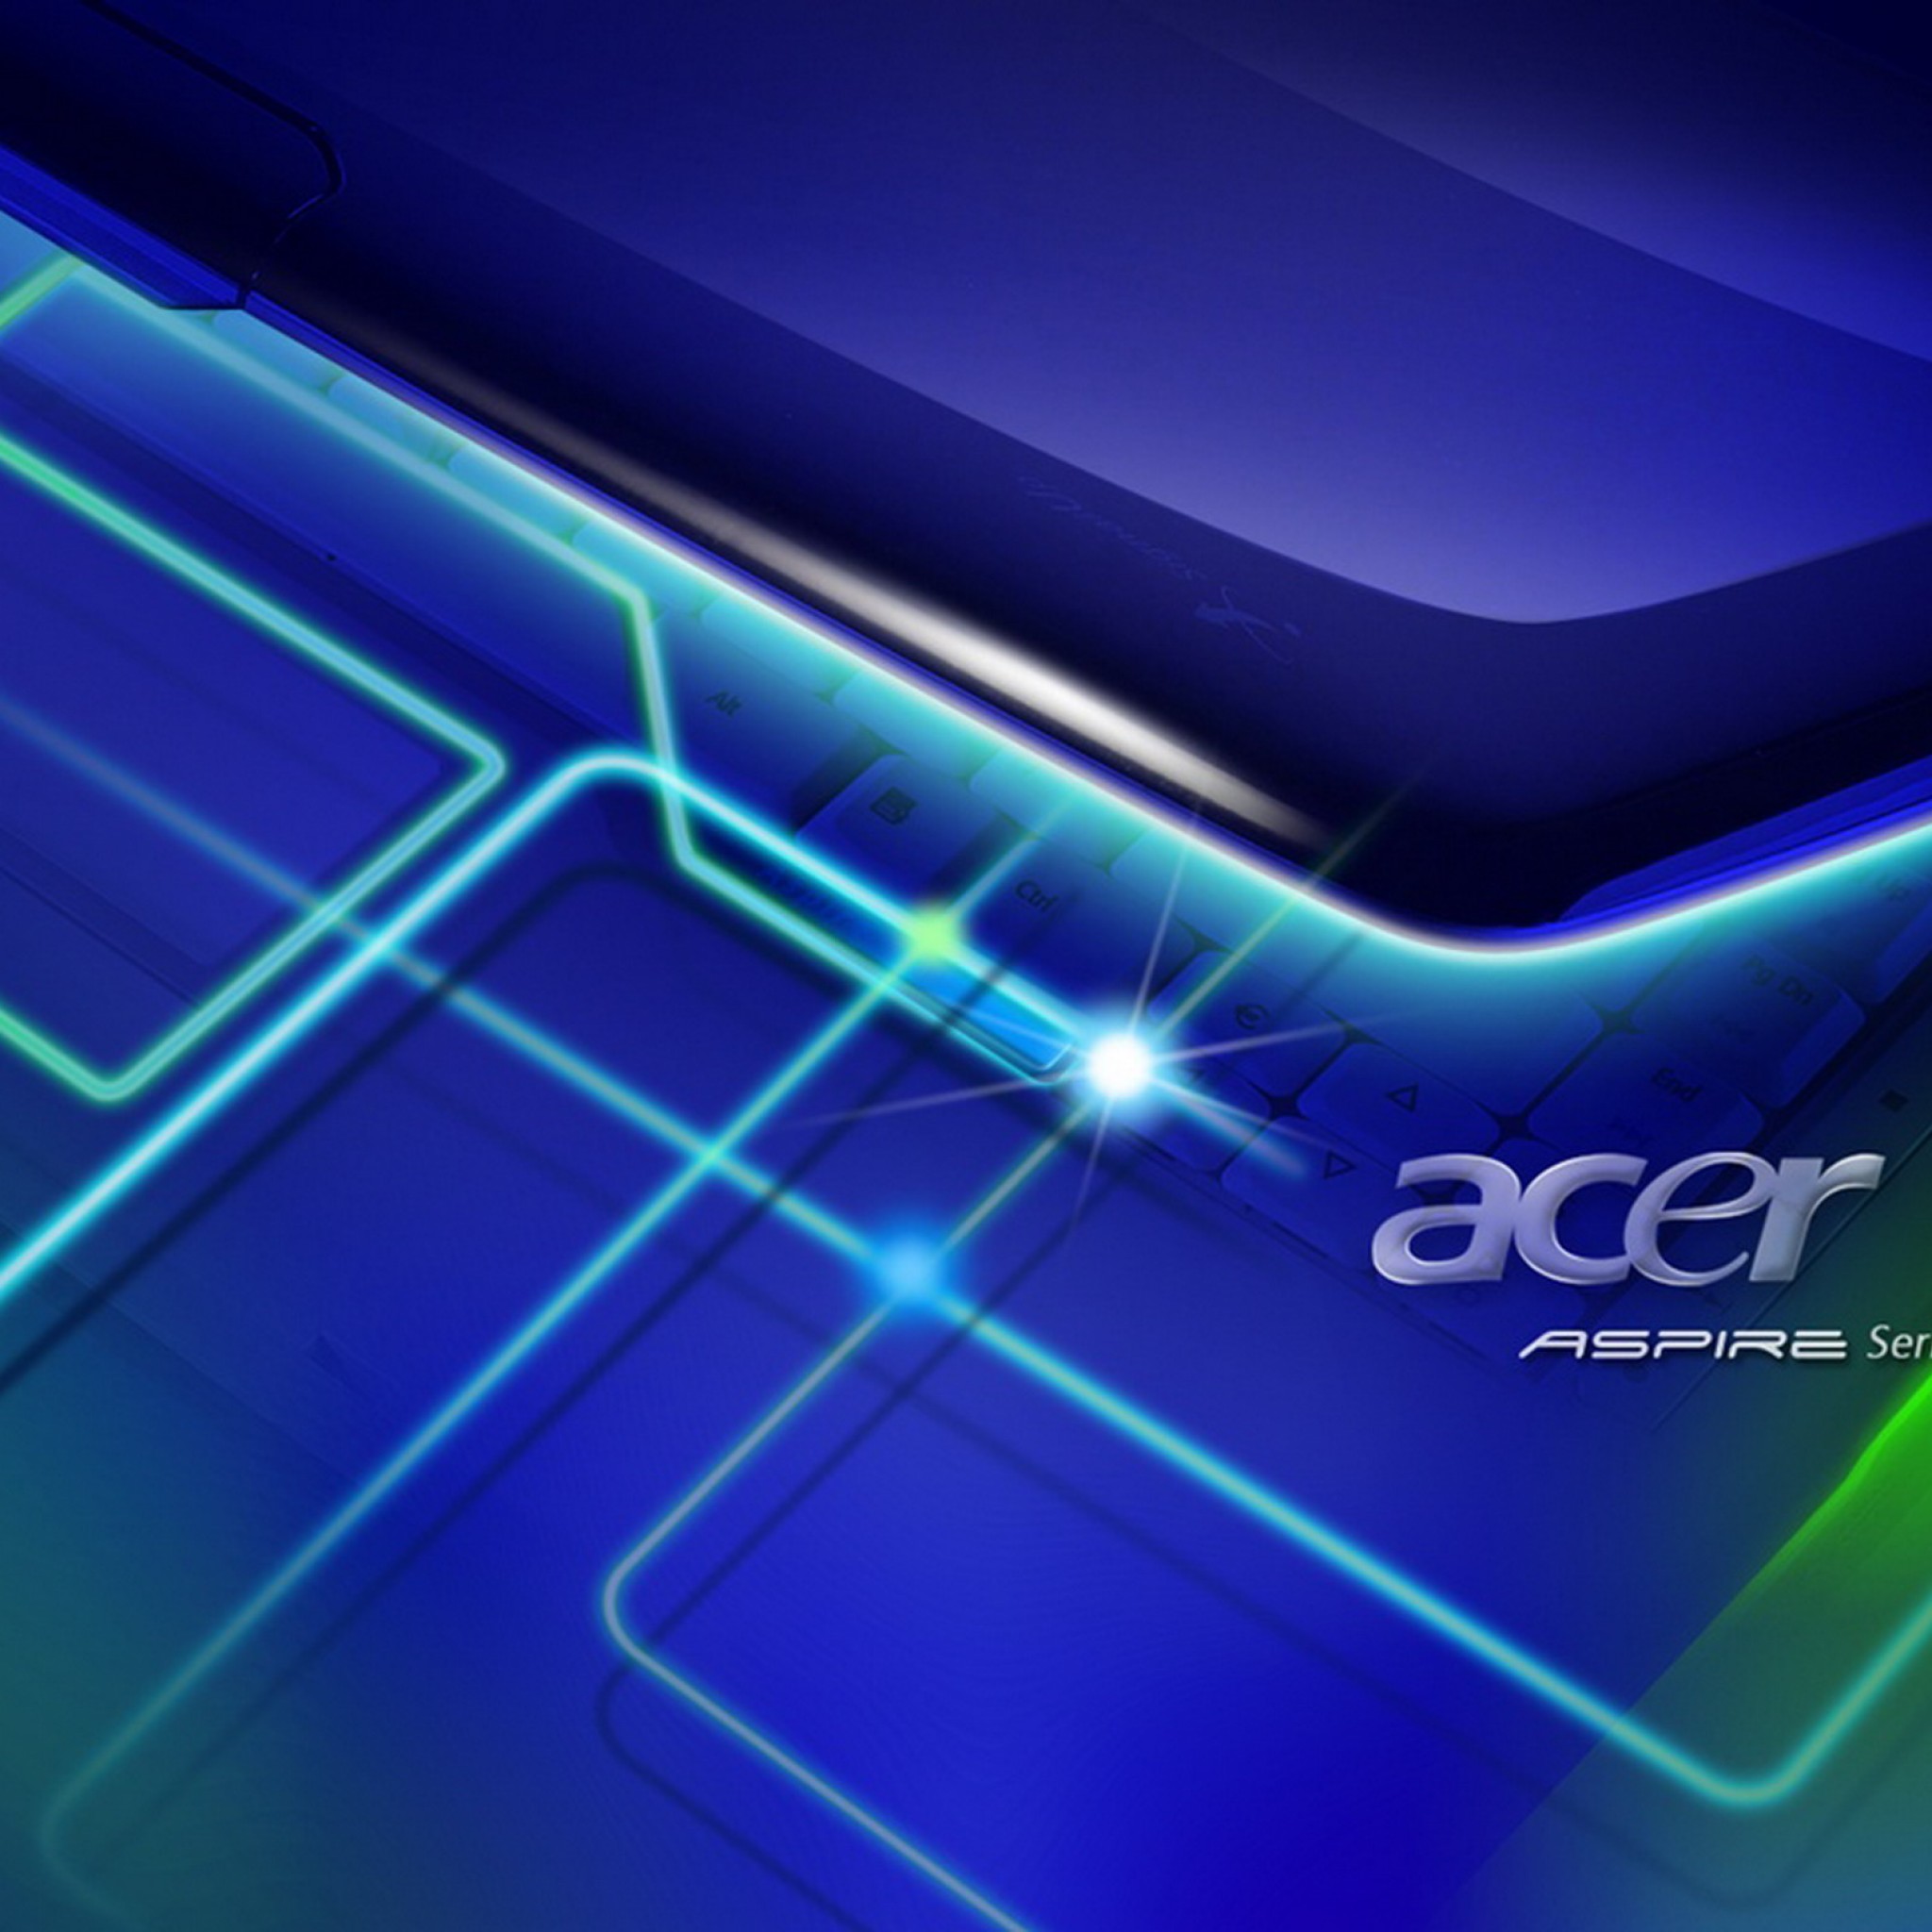 Acer Wallpaper Picture Wallpapers Shop Ipad タブレット壁紙ギャラリー